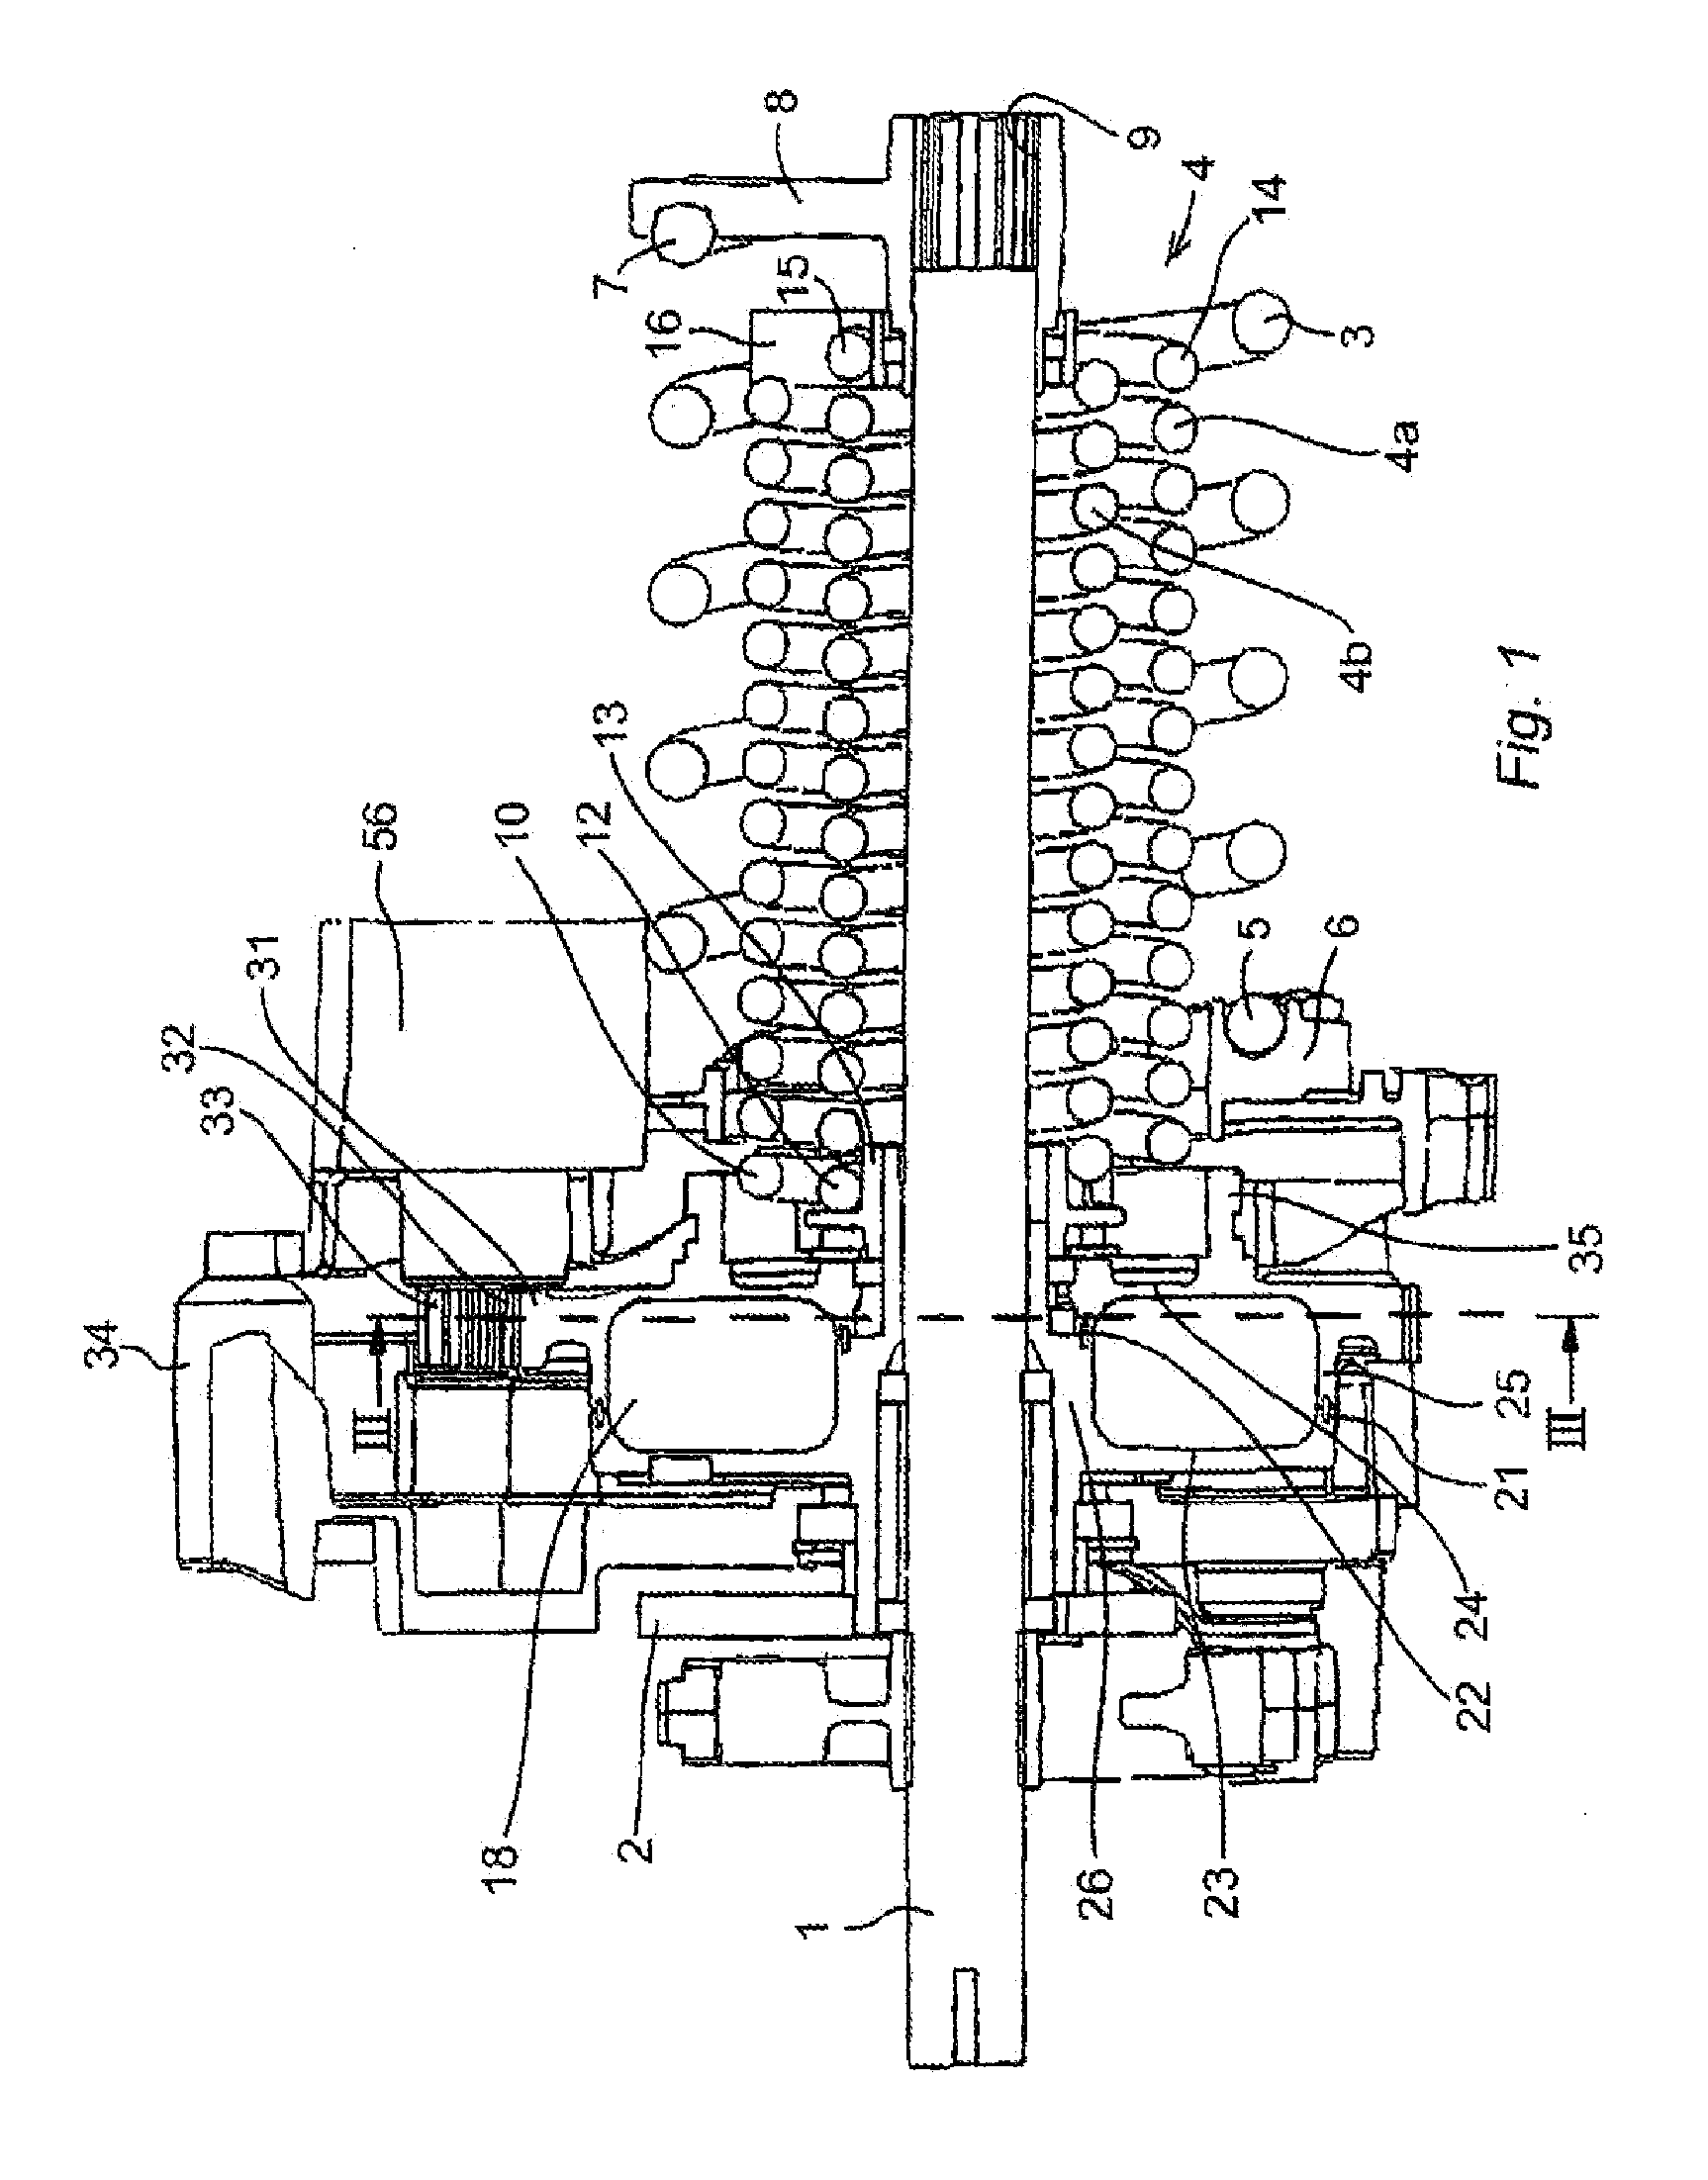 Spring Operated Actuator For An Electrical Switching Apparatus